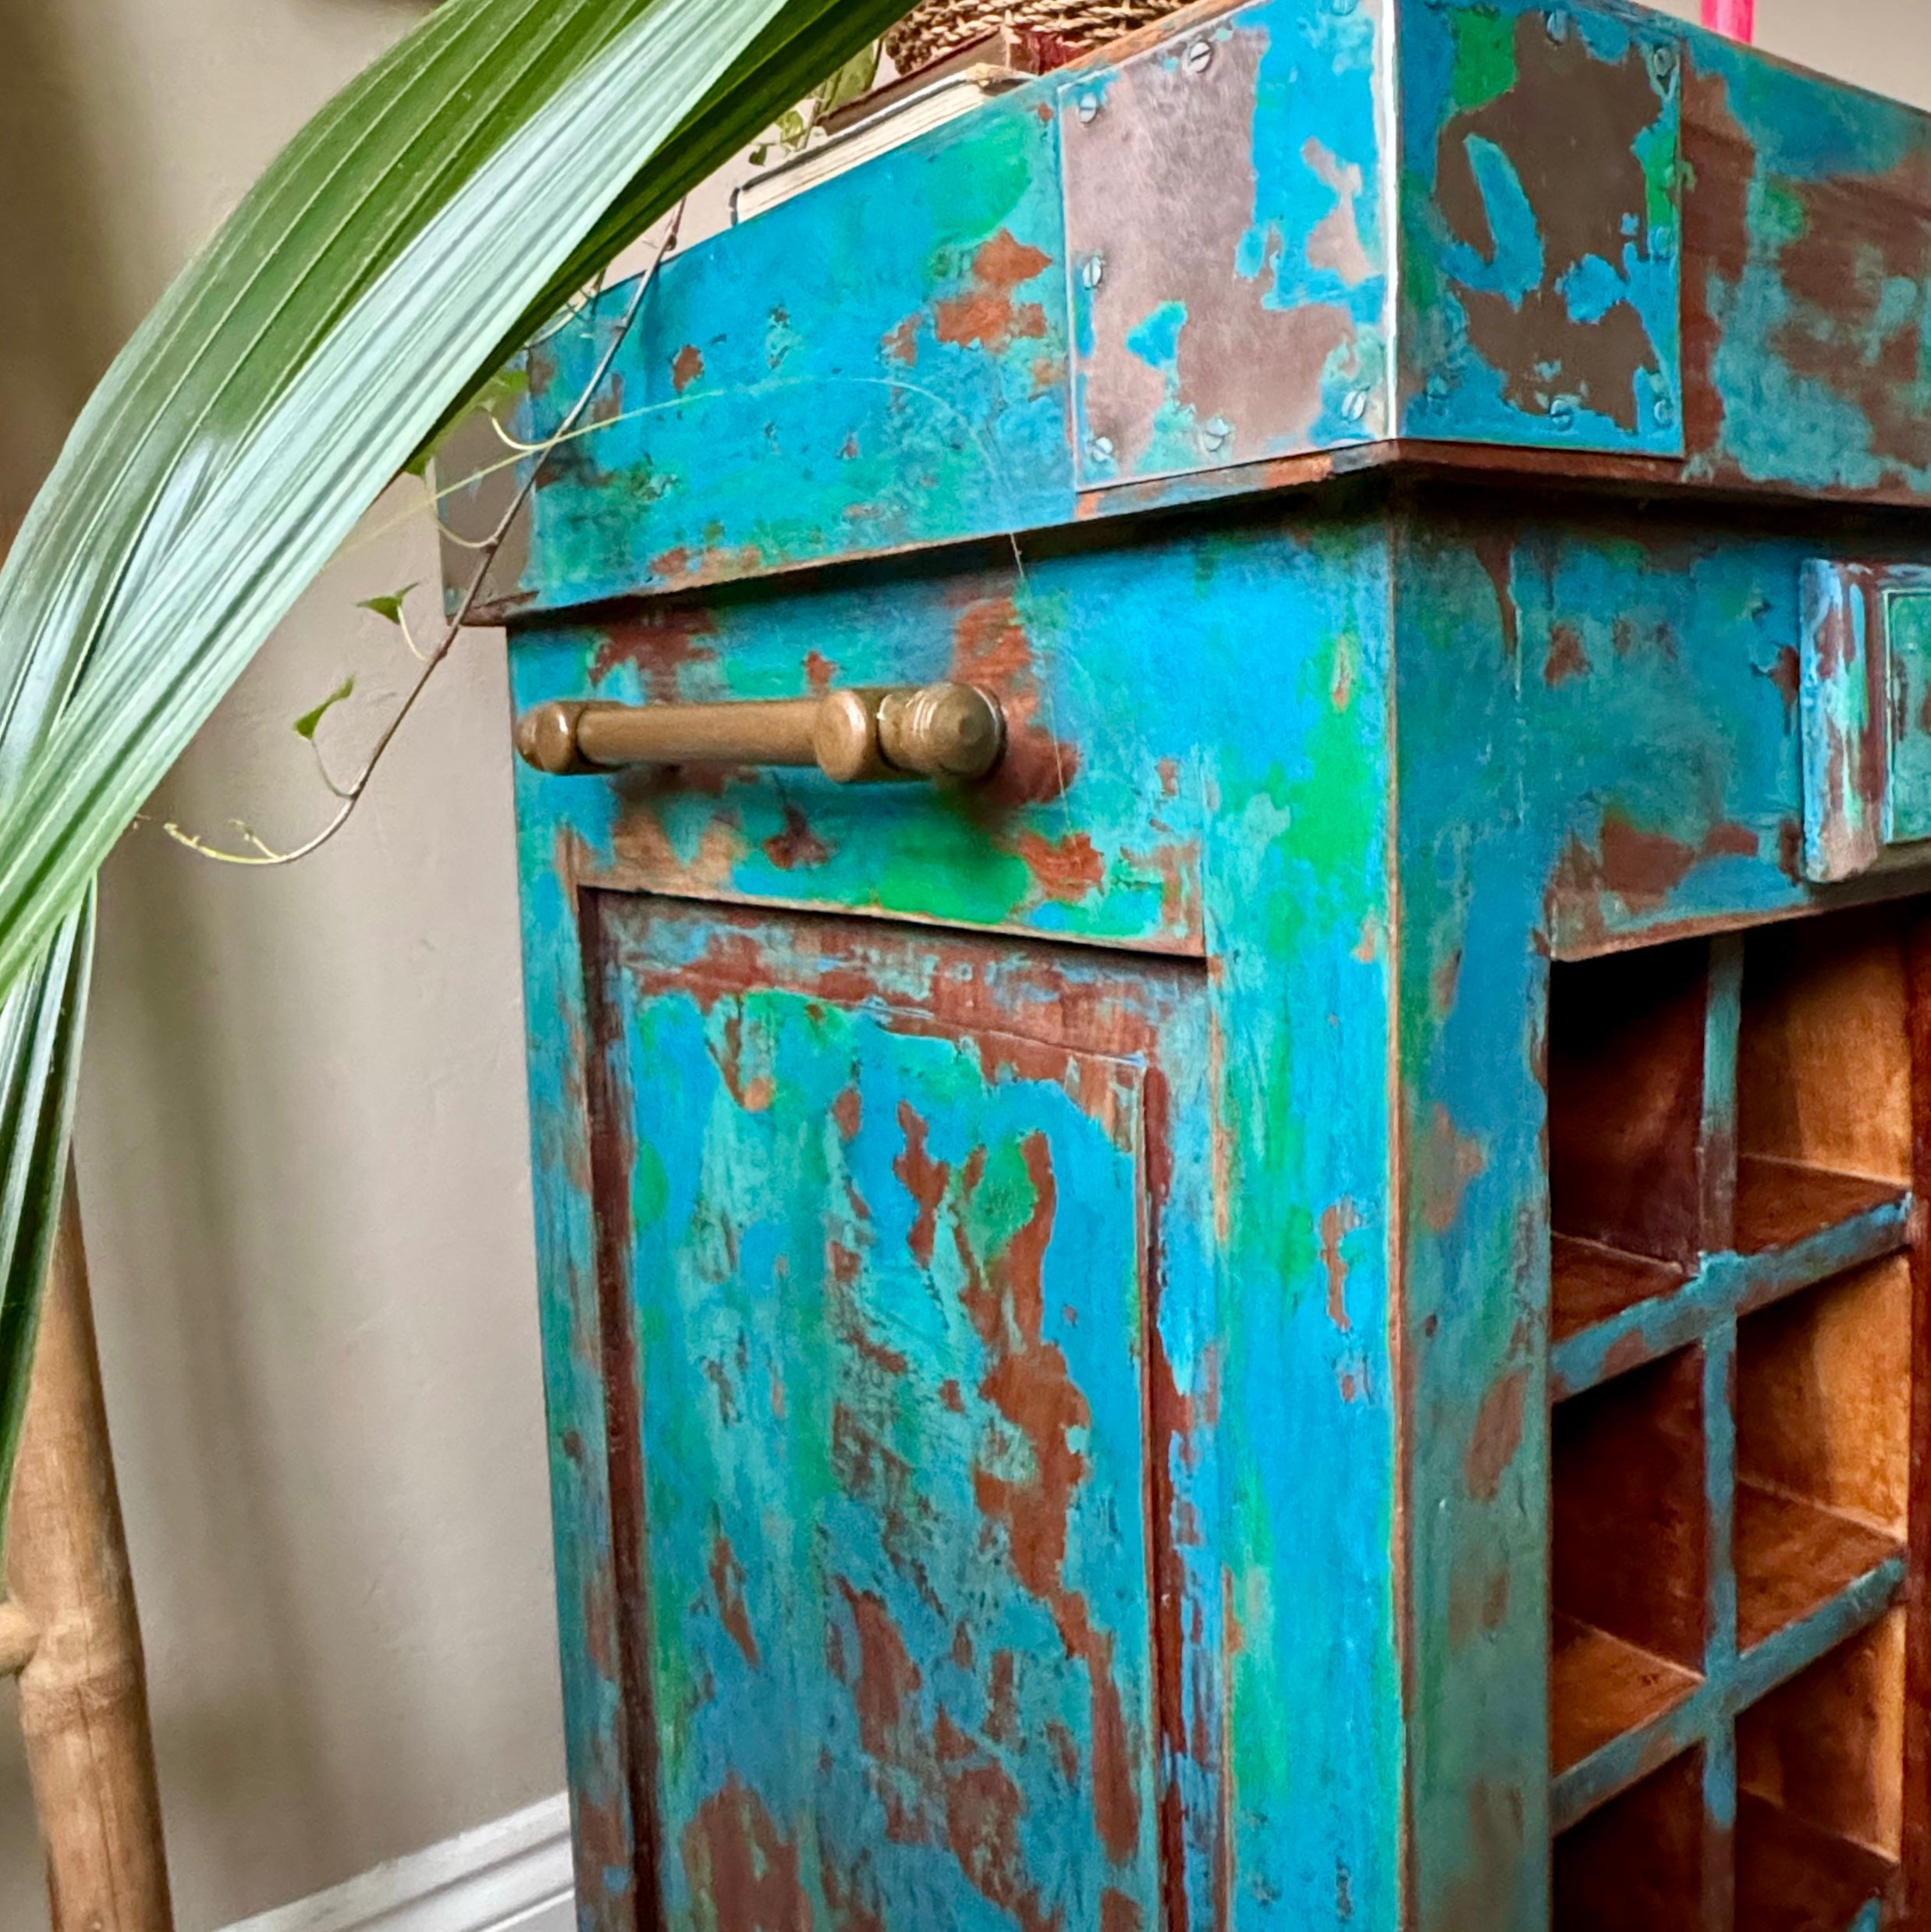 Blue and Green Vintage Indian Style Cabinet